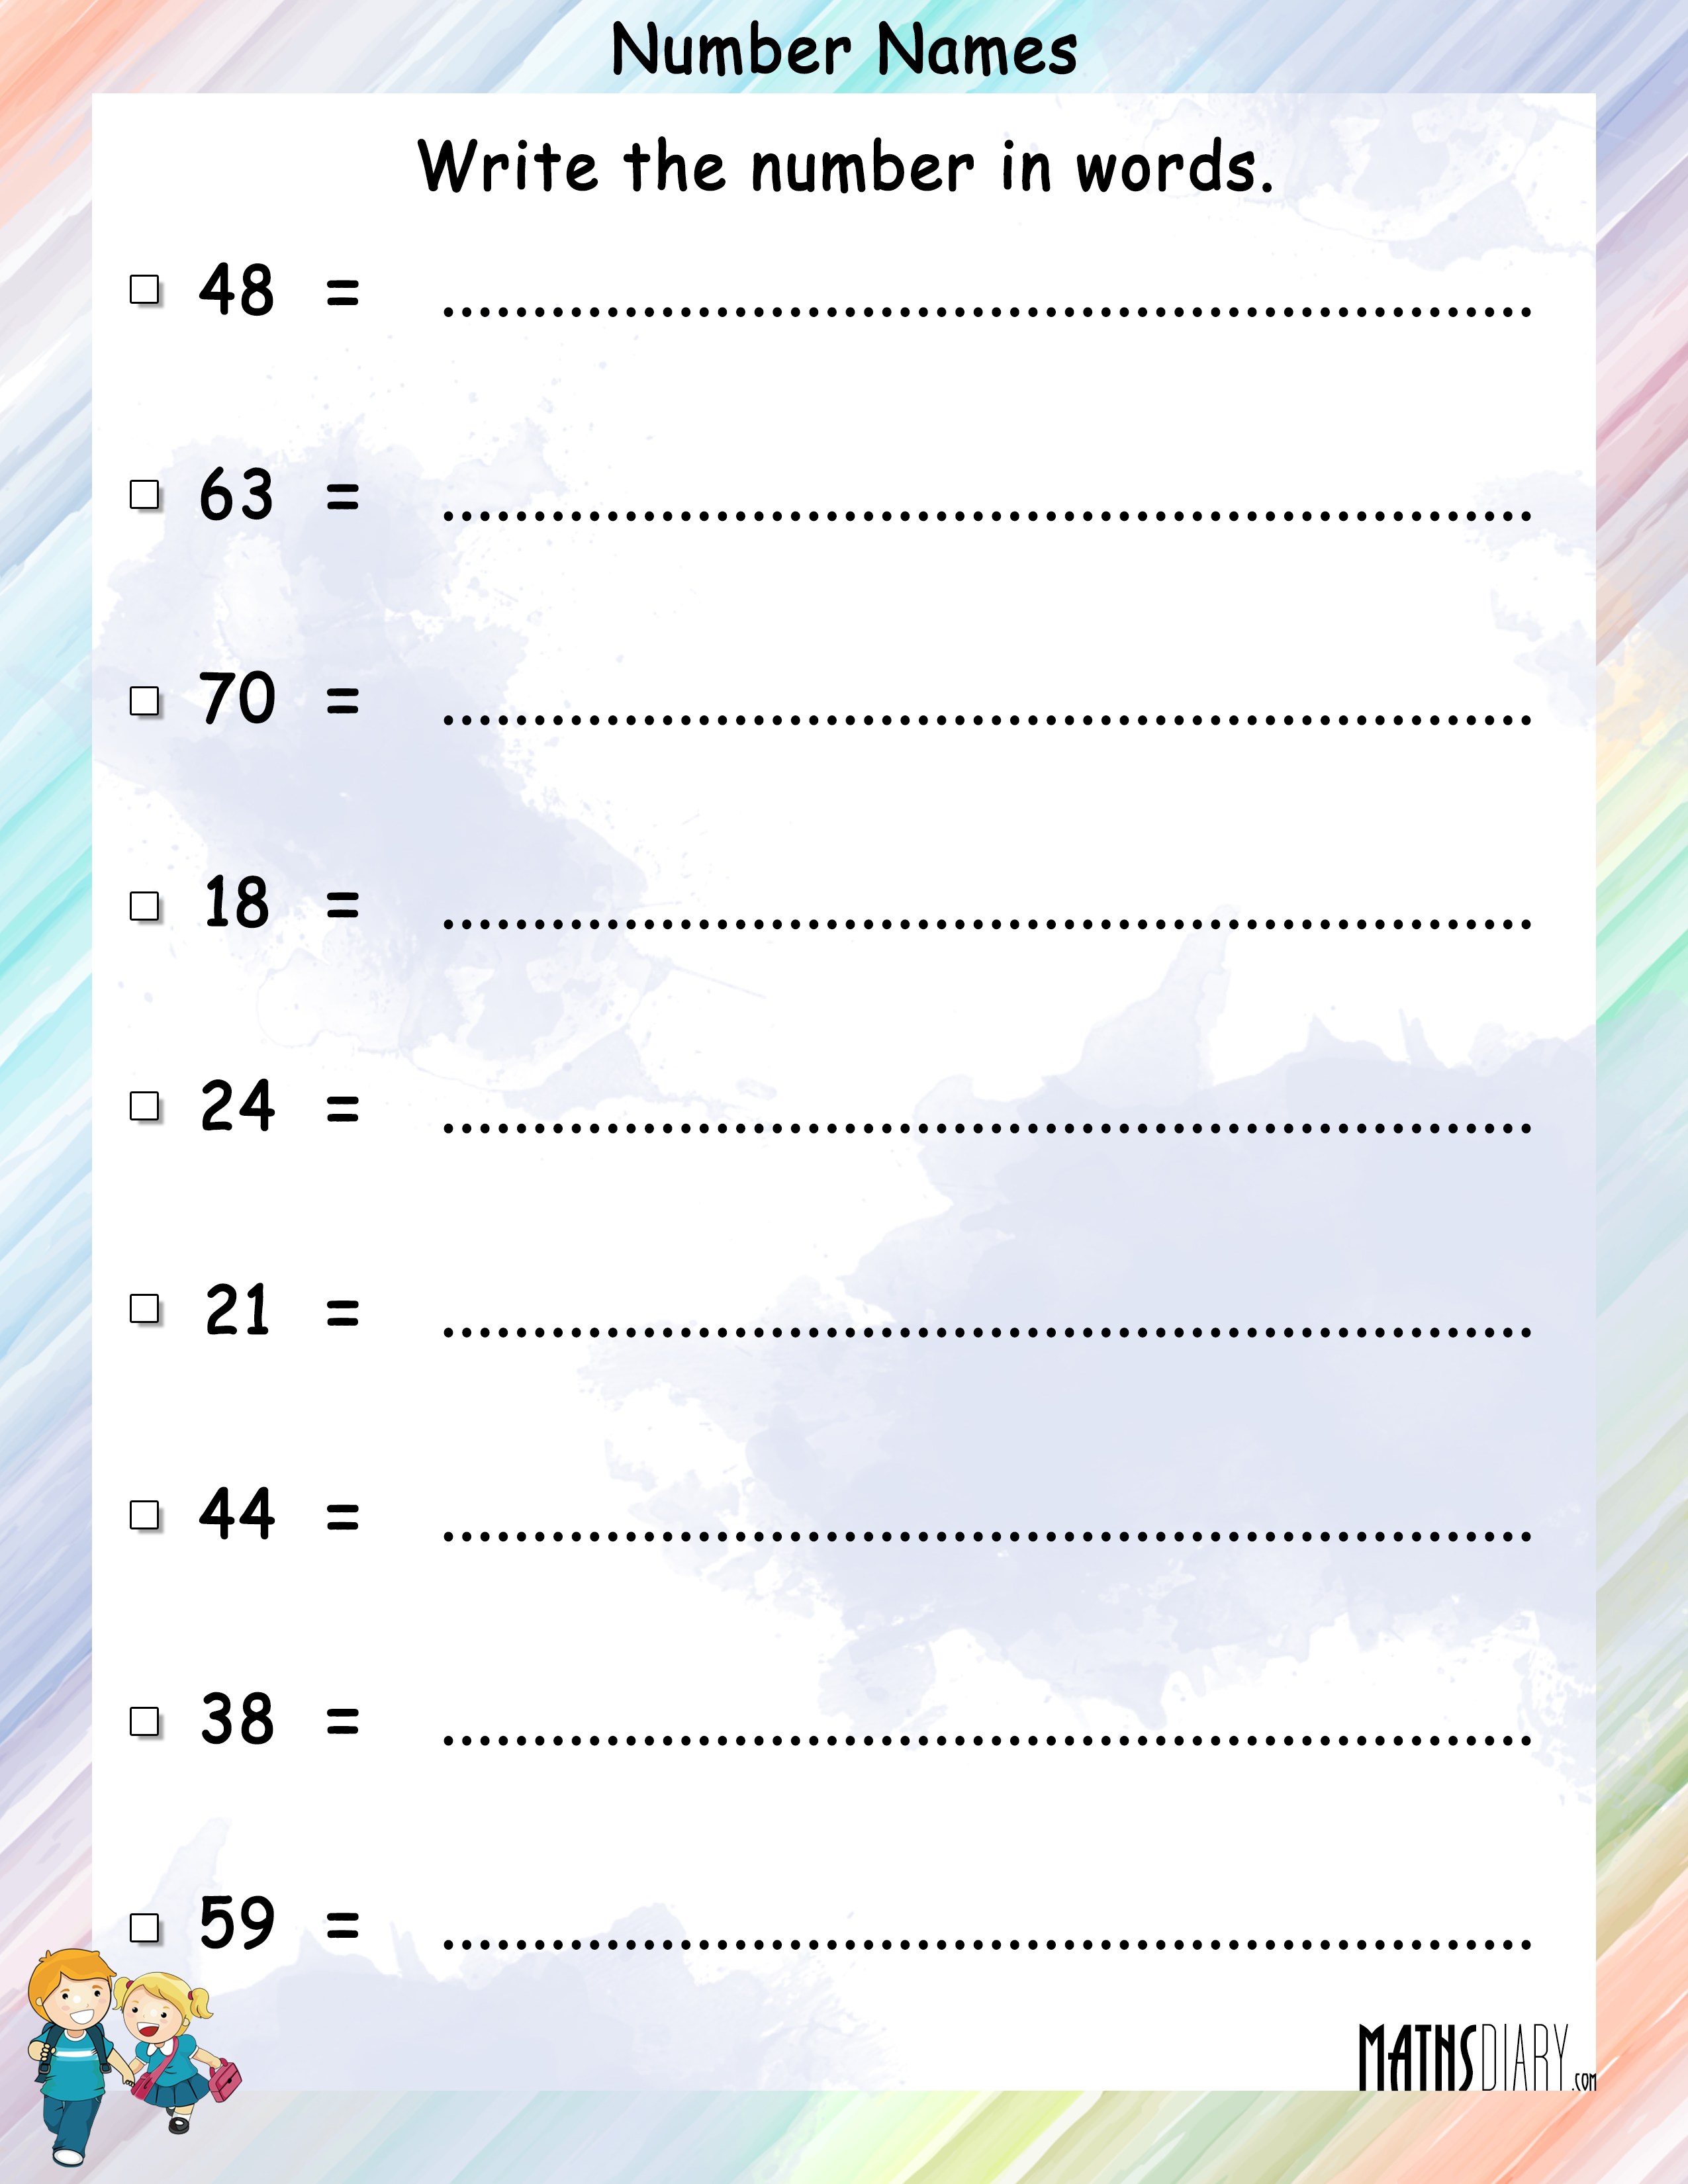 Write Numbers in words Math Worksheets MathsDiary com